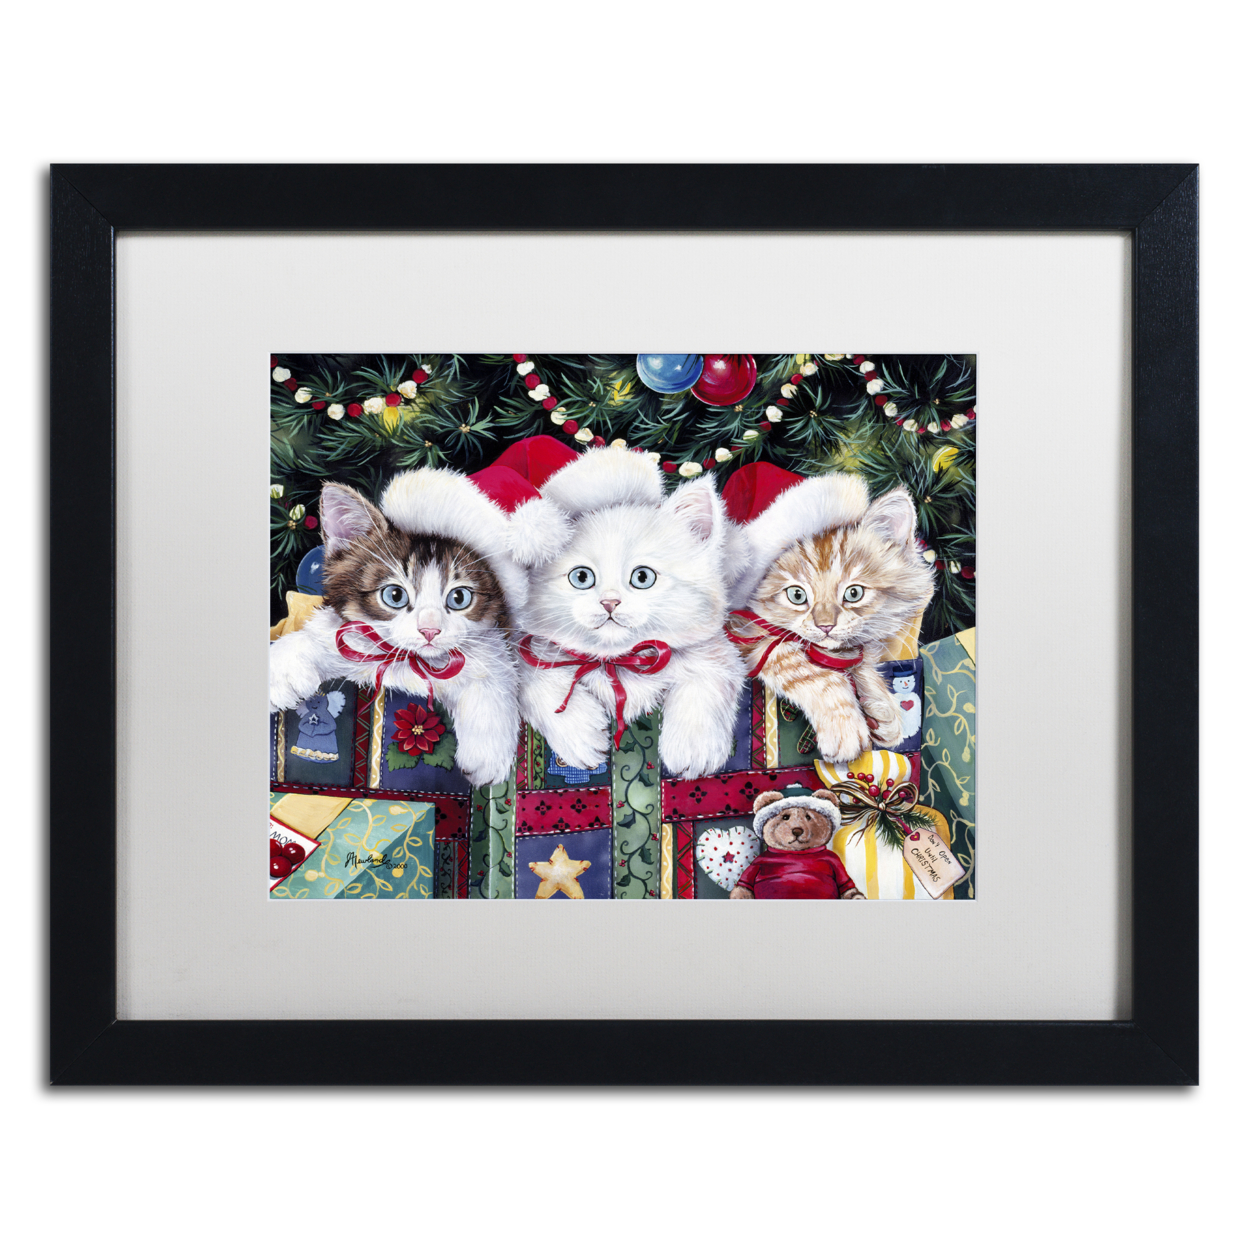 Jenny Newland 'Meowy Christmas' Black Wooden Framed Art 18 X 22 Inches